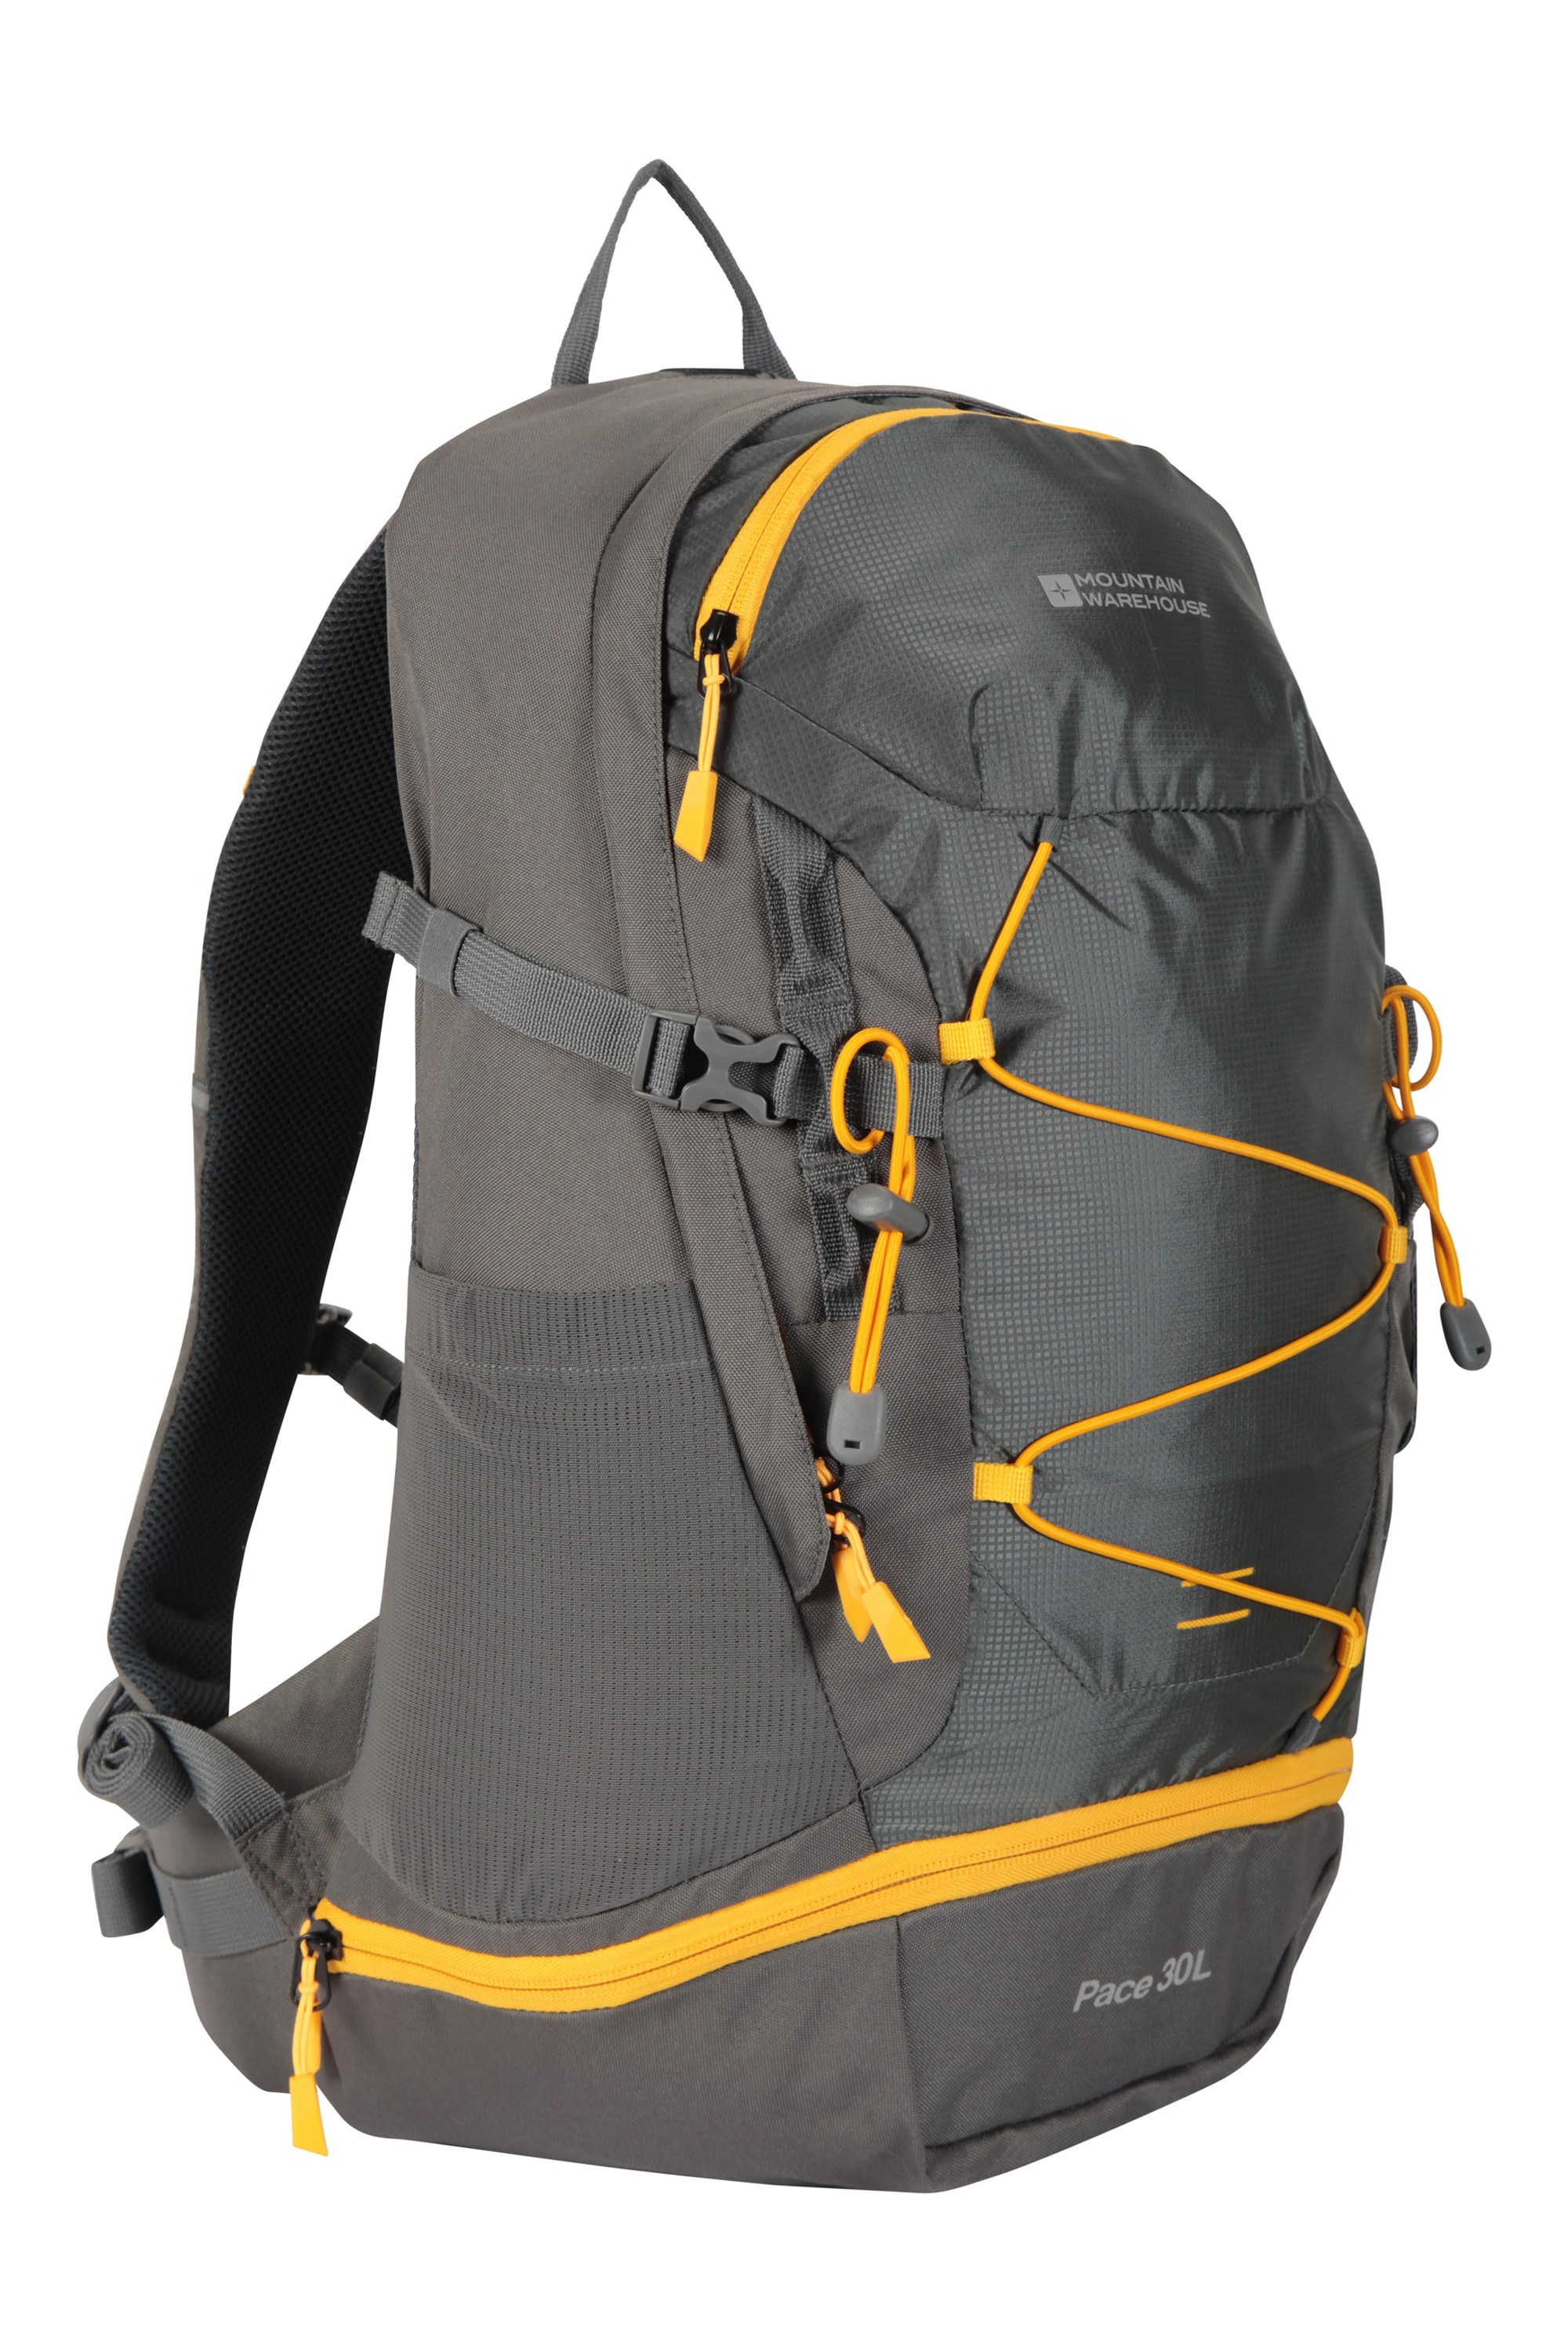 Mountain Warehouse Small Dry Pack Liner 22L Backpack Liner Waterproof Rucksack